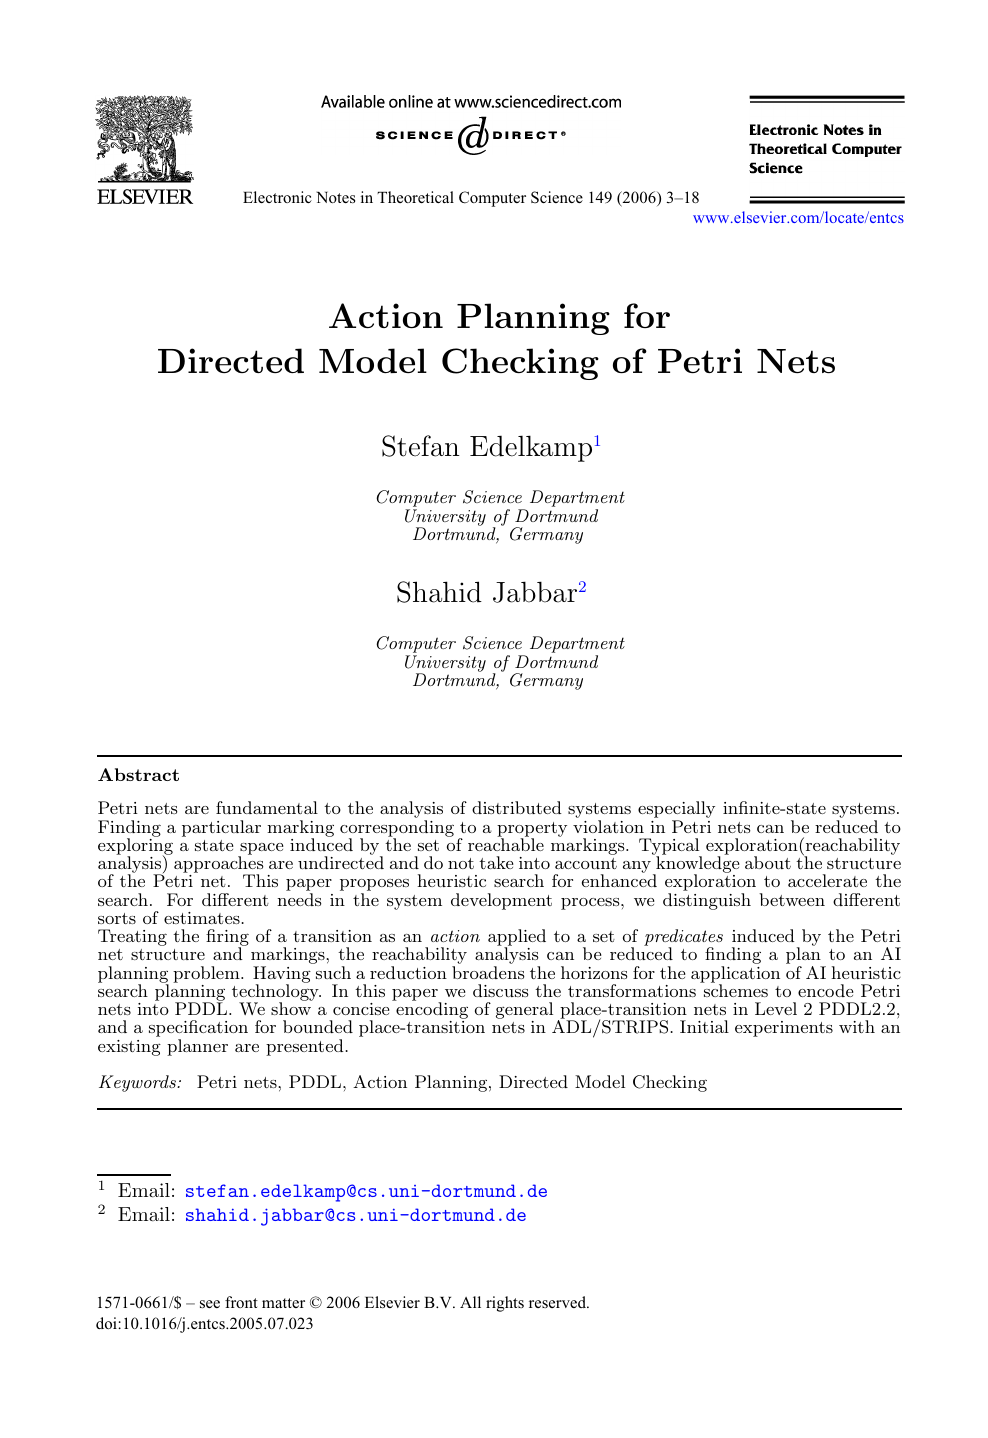 Action Planning For Directed Model Checking Of Petri Nets - 